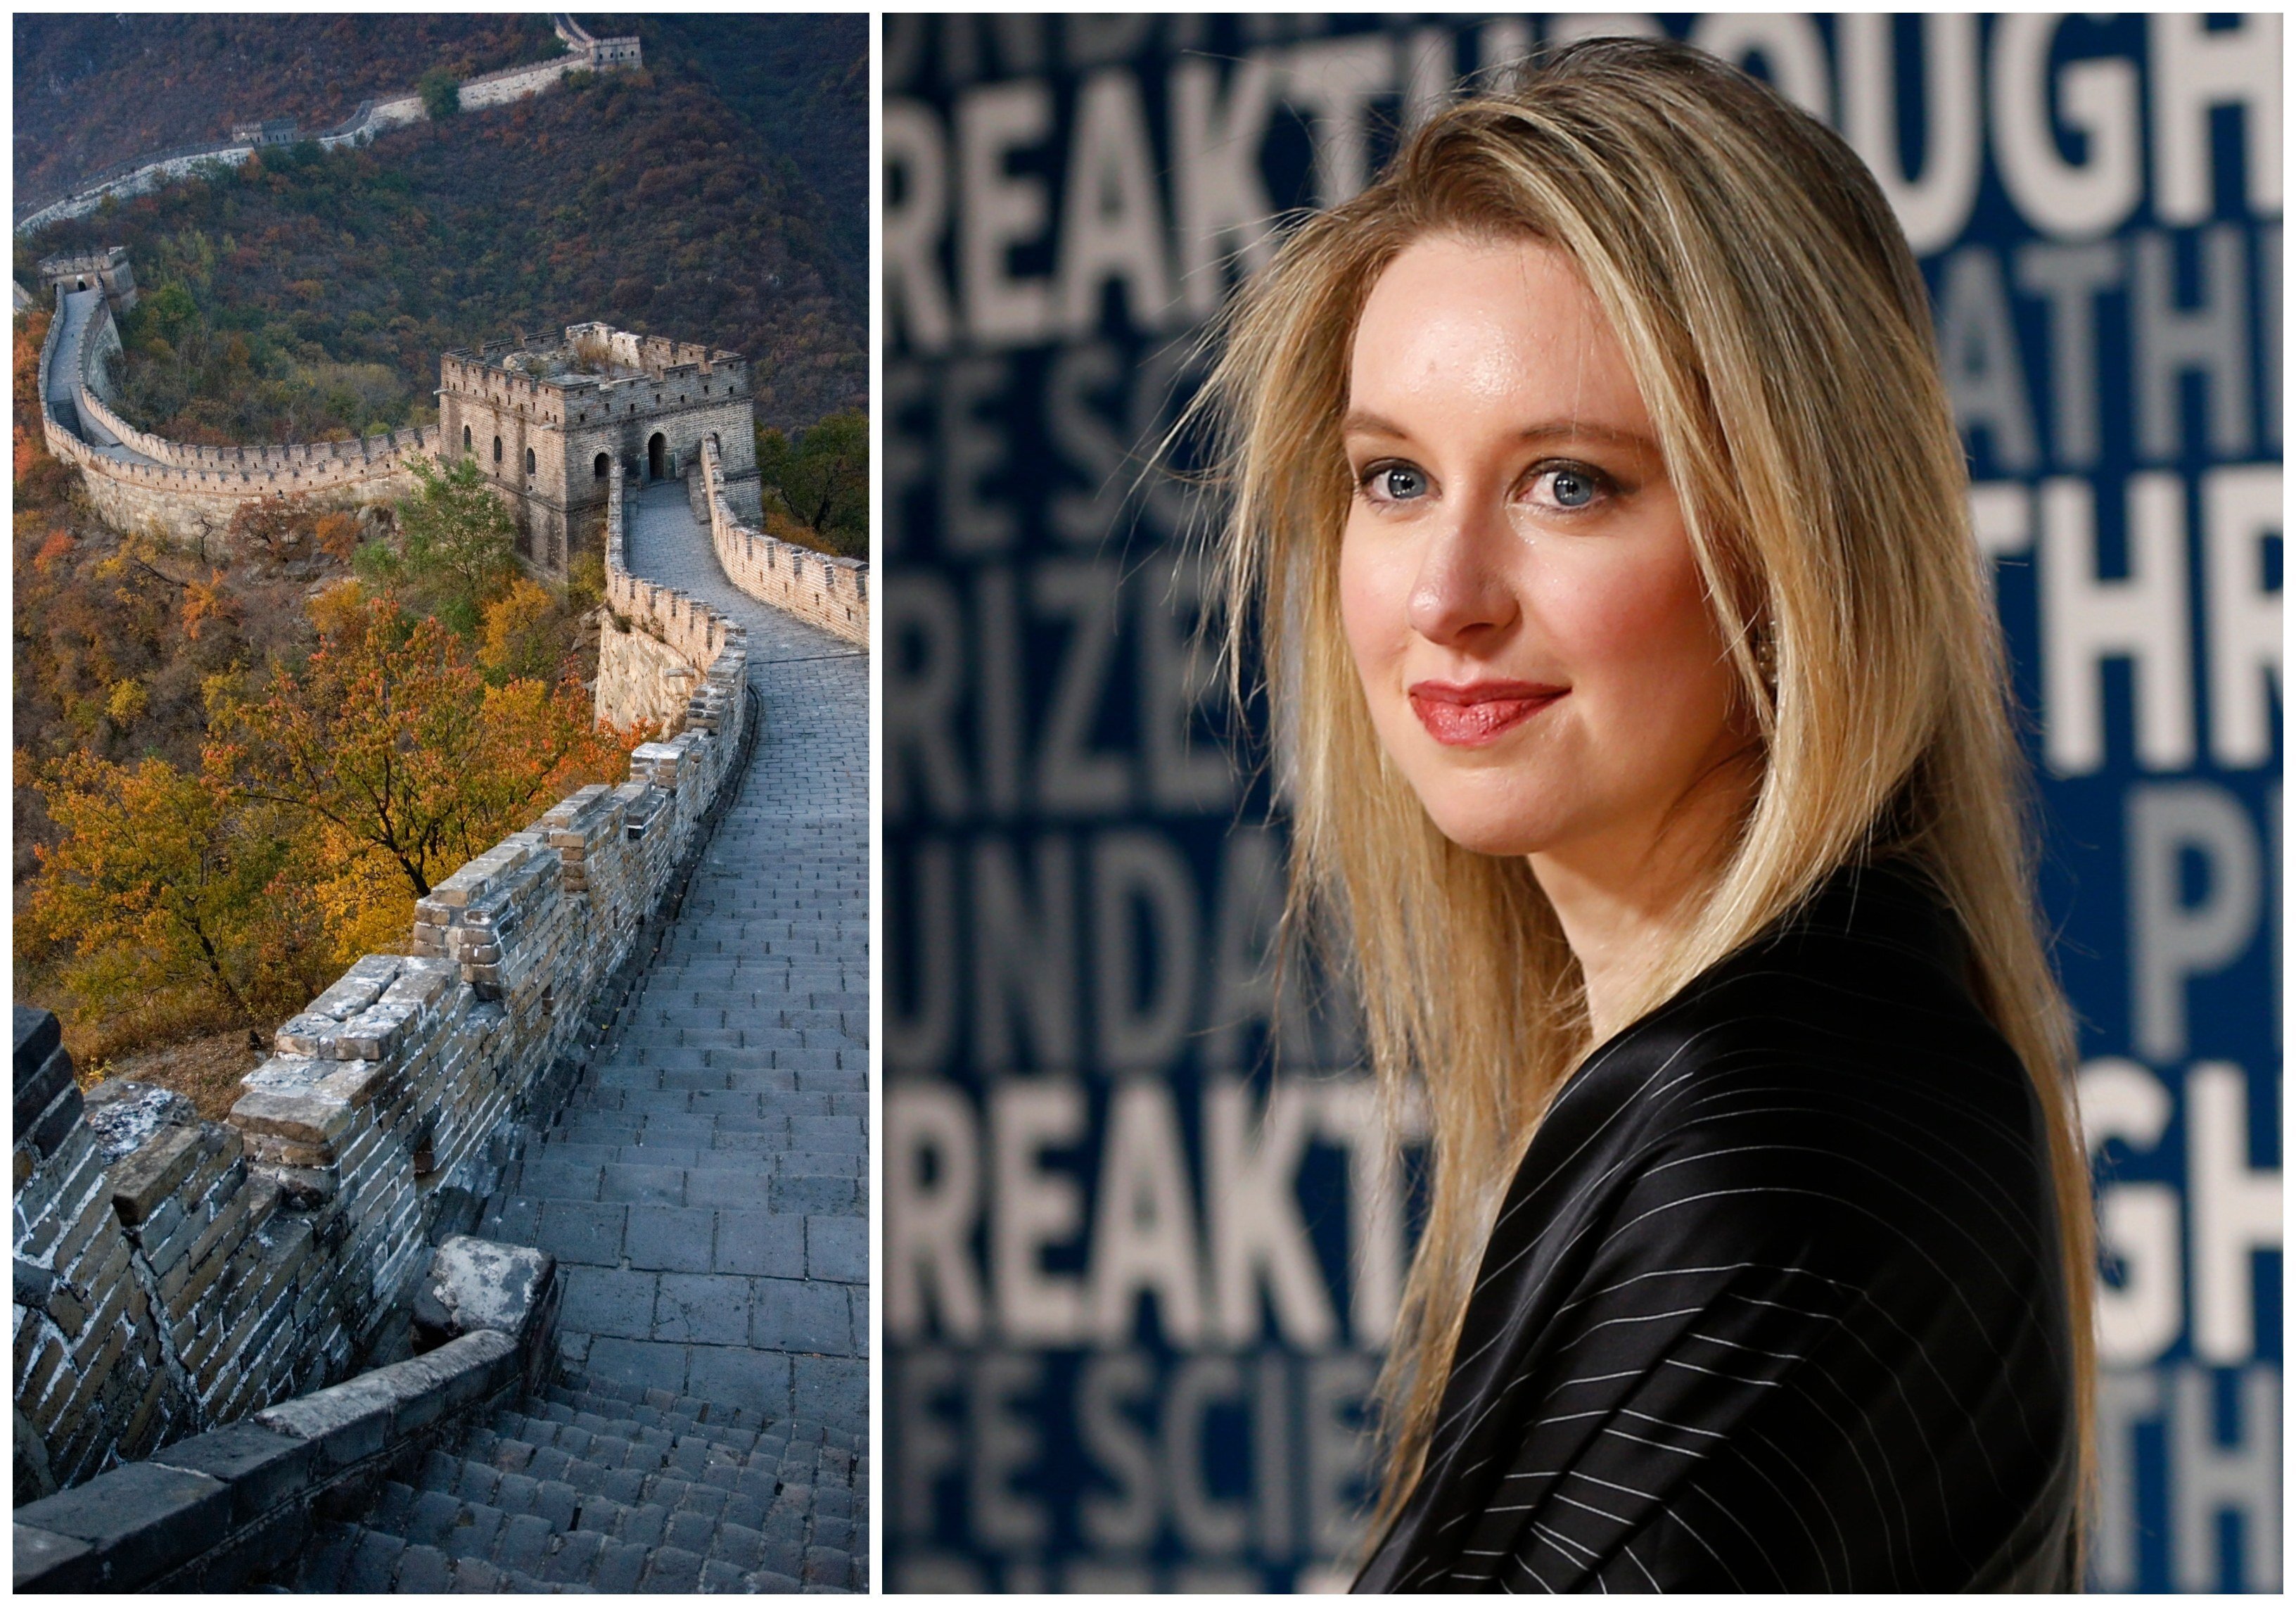 Elizabeth Holmes' secret links to China: the disgraced Theranos